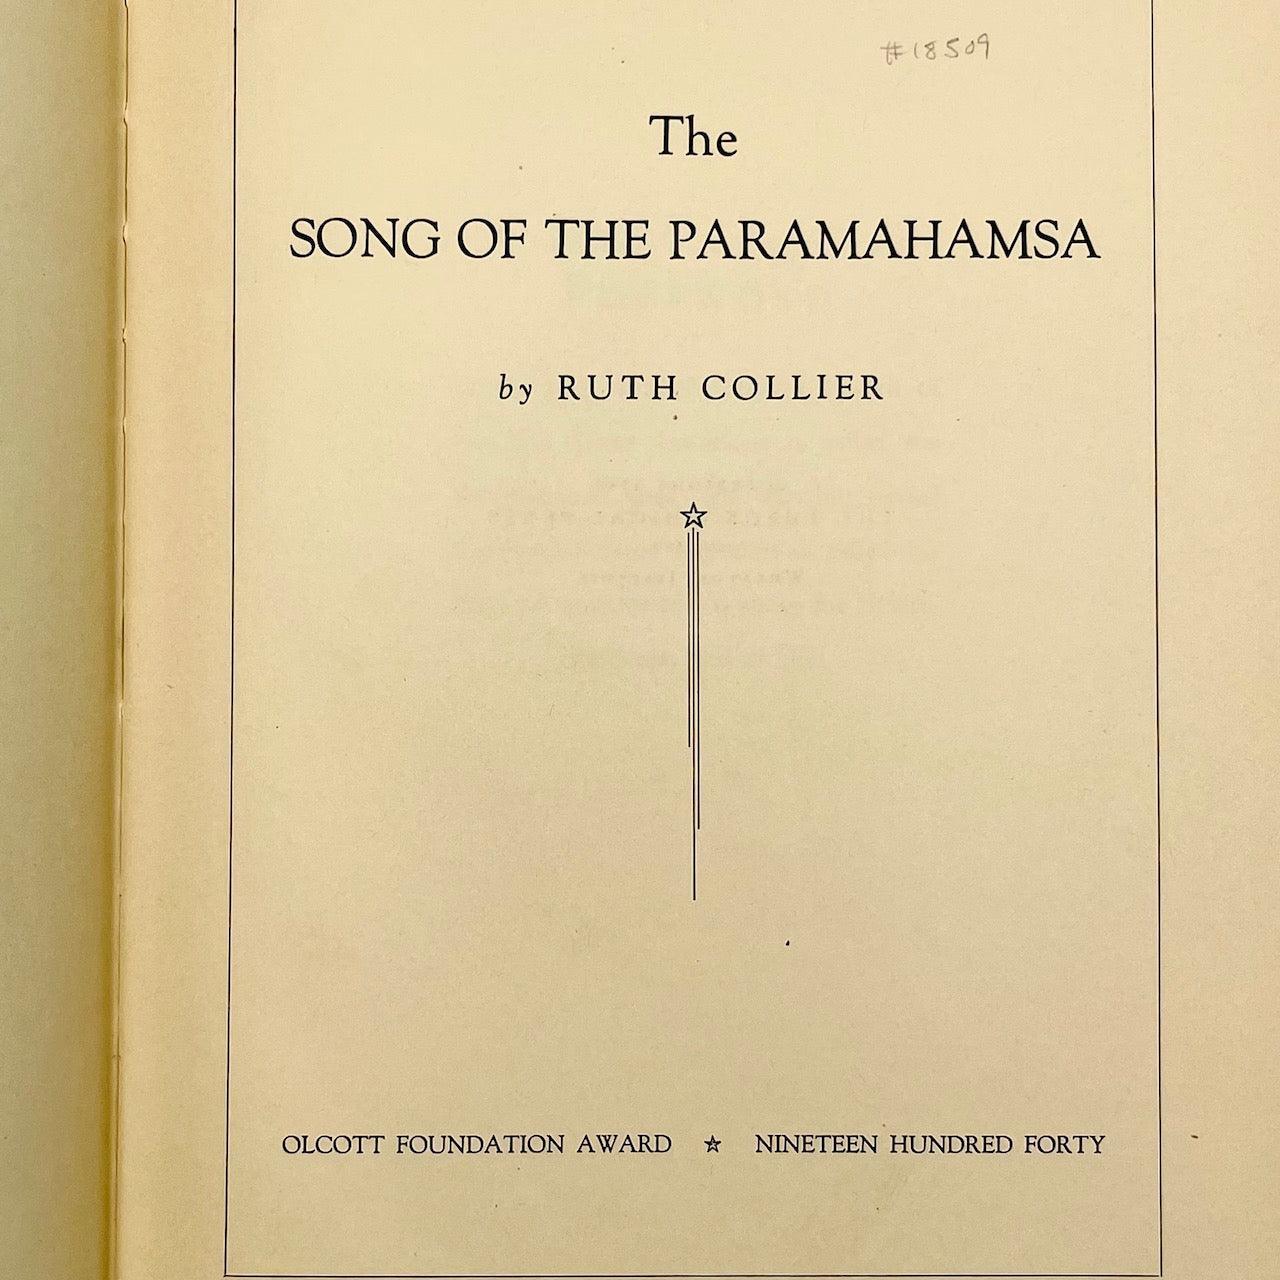 The Song of the Paramahamsa - Grinning Cat Books - THEOLOGY - PHILOSOPHY, POETRY, RELIGION, THEOlOGY